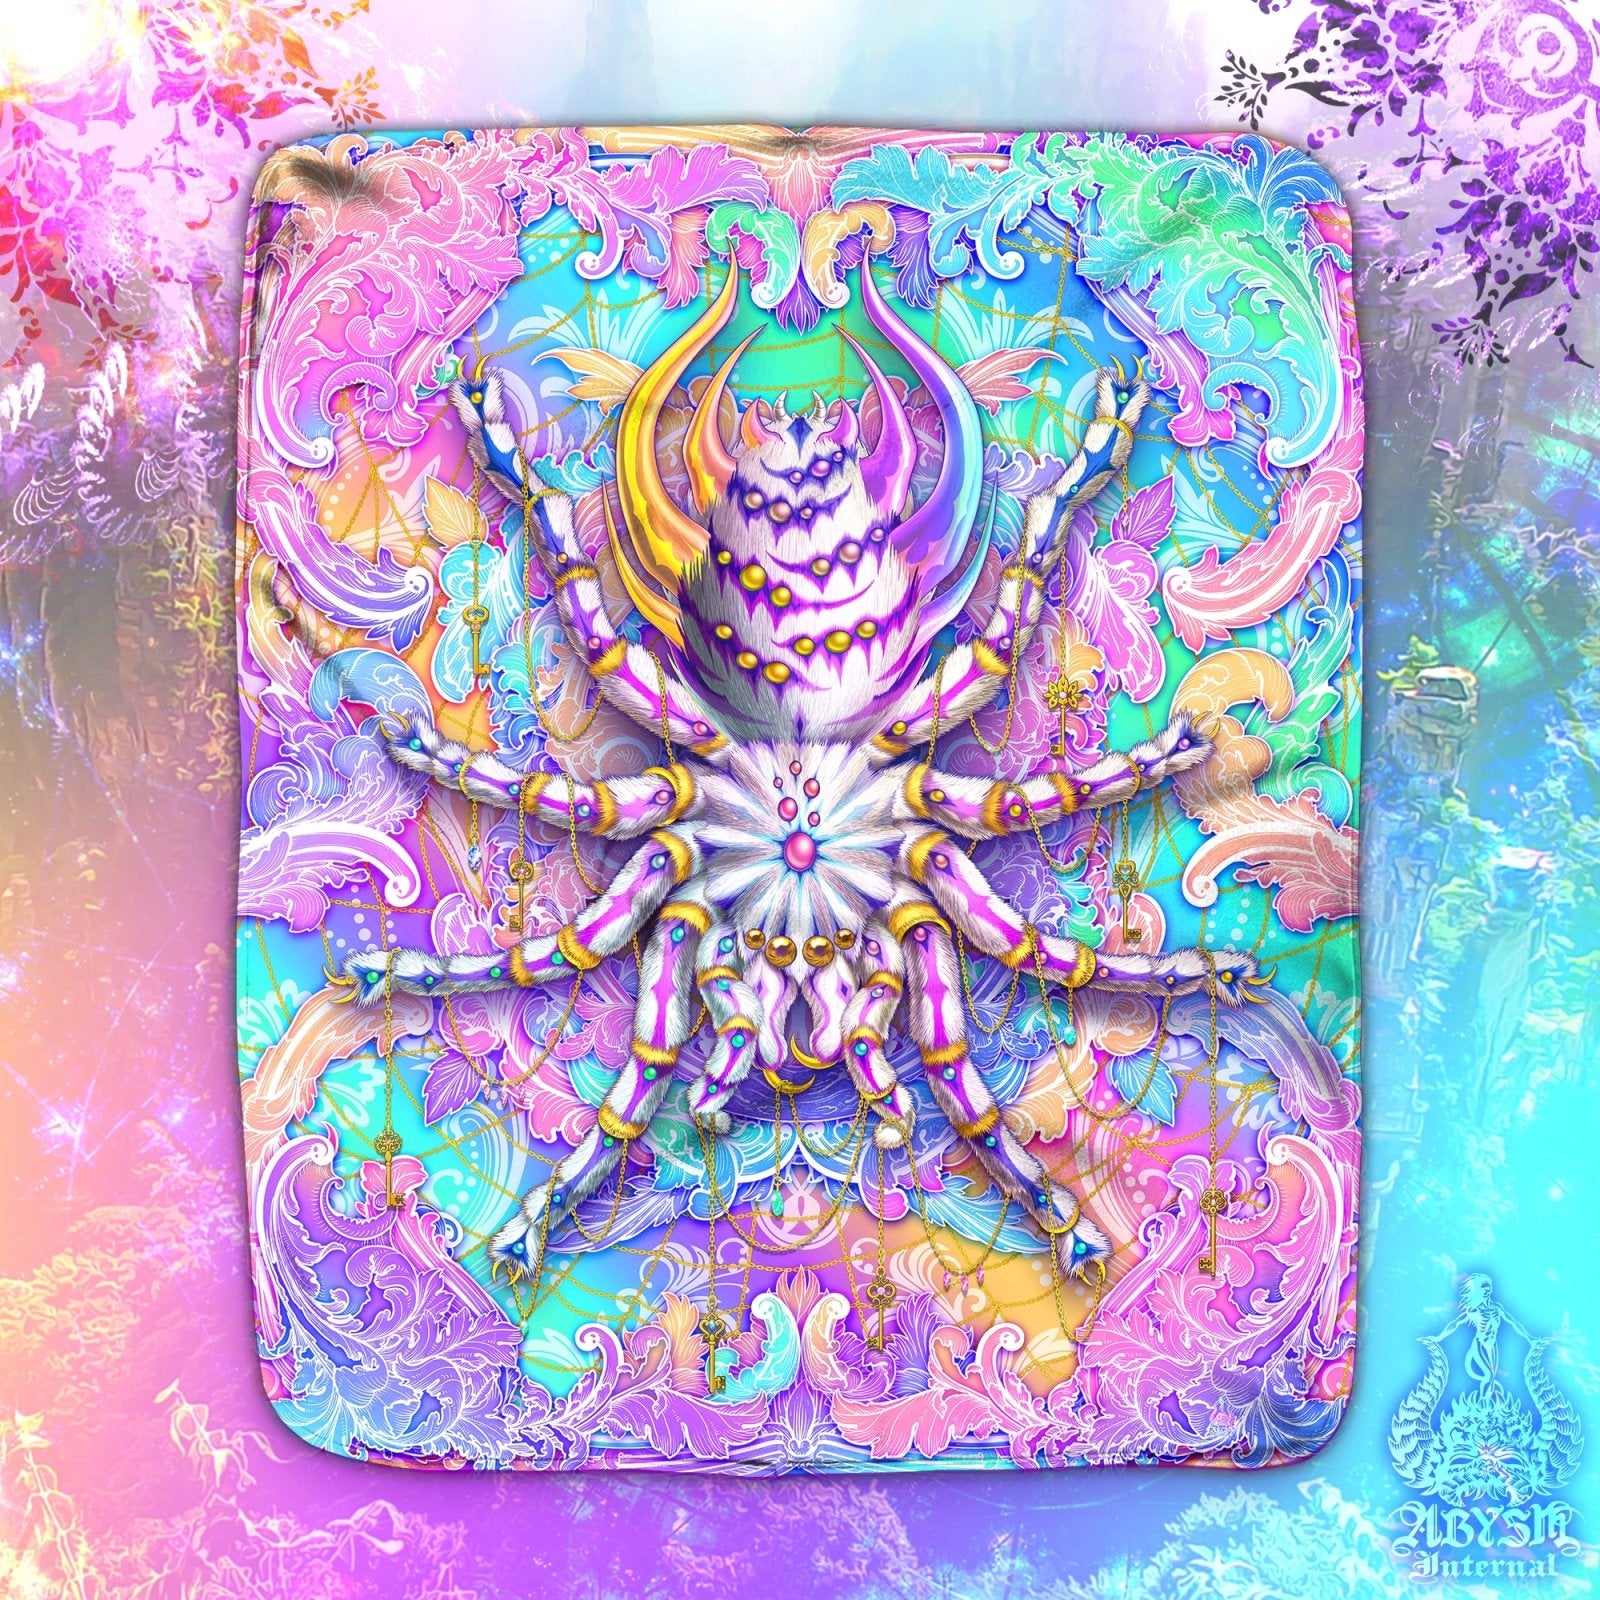 Aesthetic Throw Fleece Blanket, Holographic Pastel Home Decor, Psychedelic Gift, Eclectic and Funky Gift - Spider, Tarantula Art - Abysm Internal